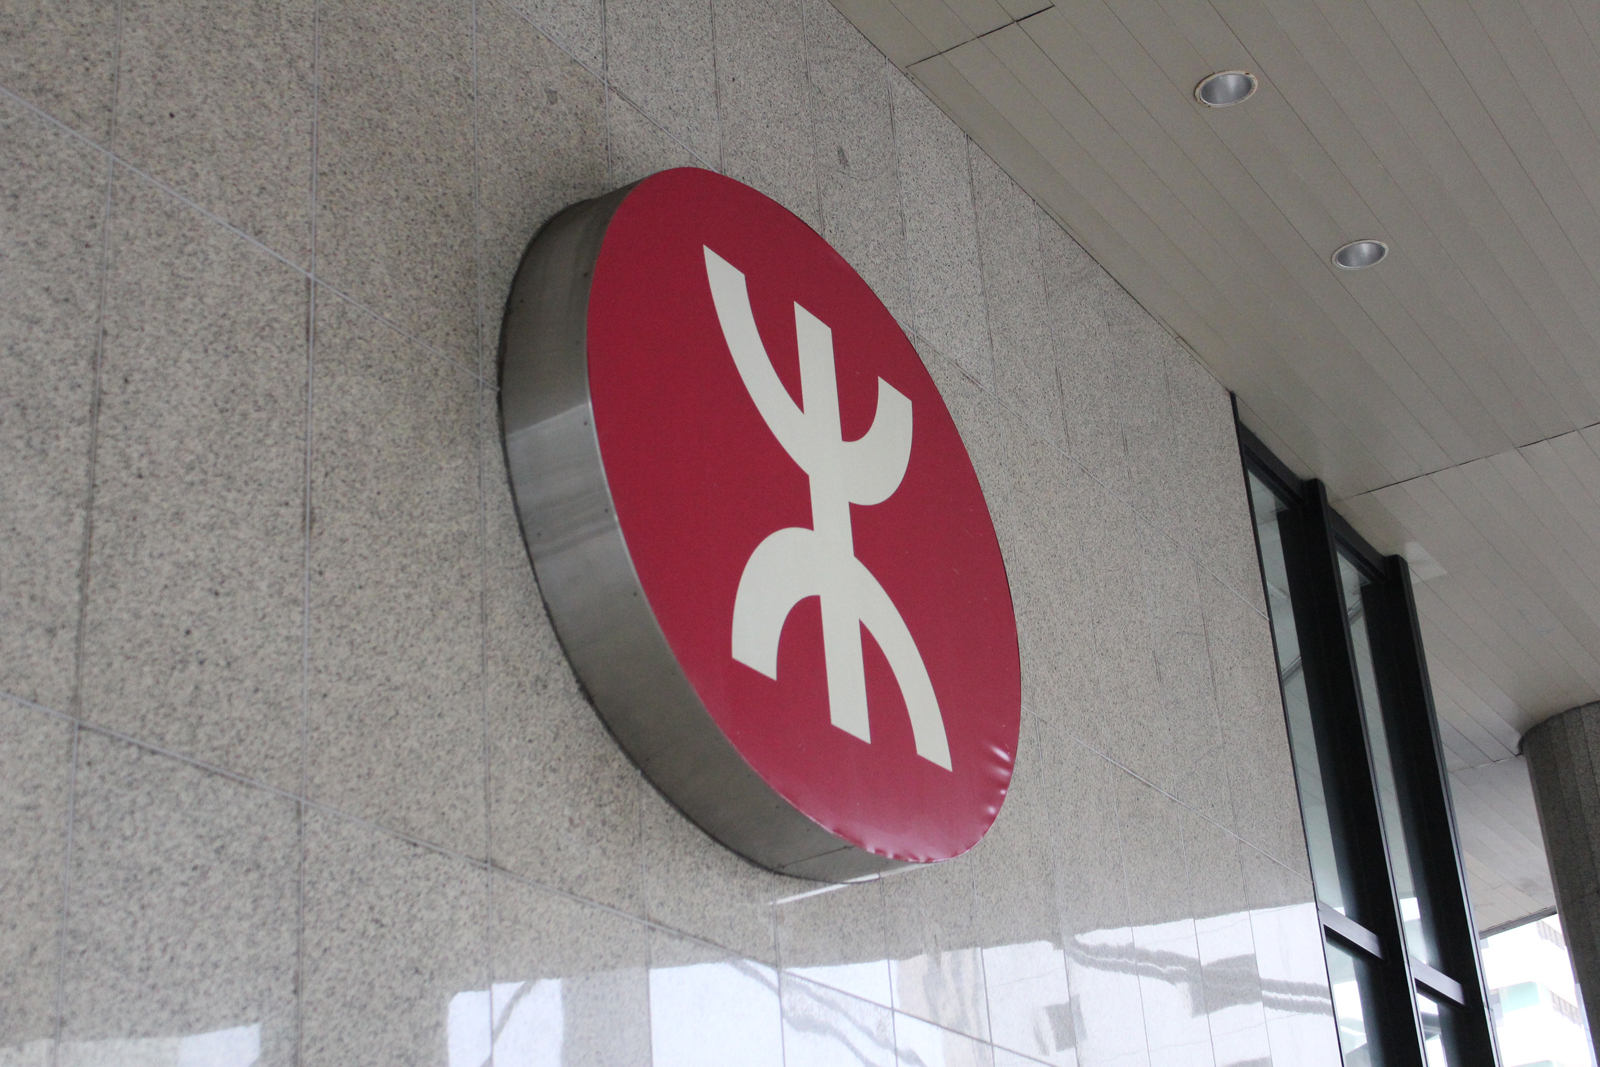 In Hong Kong, this is the symbol for the metro / subway line. If you see this, there is one very close by.